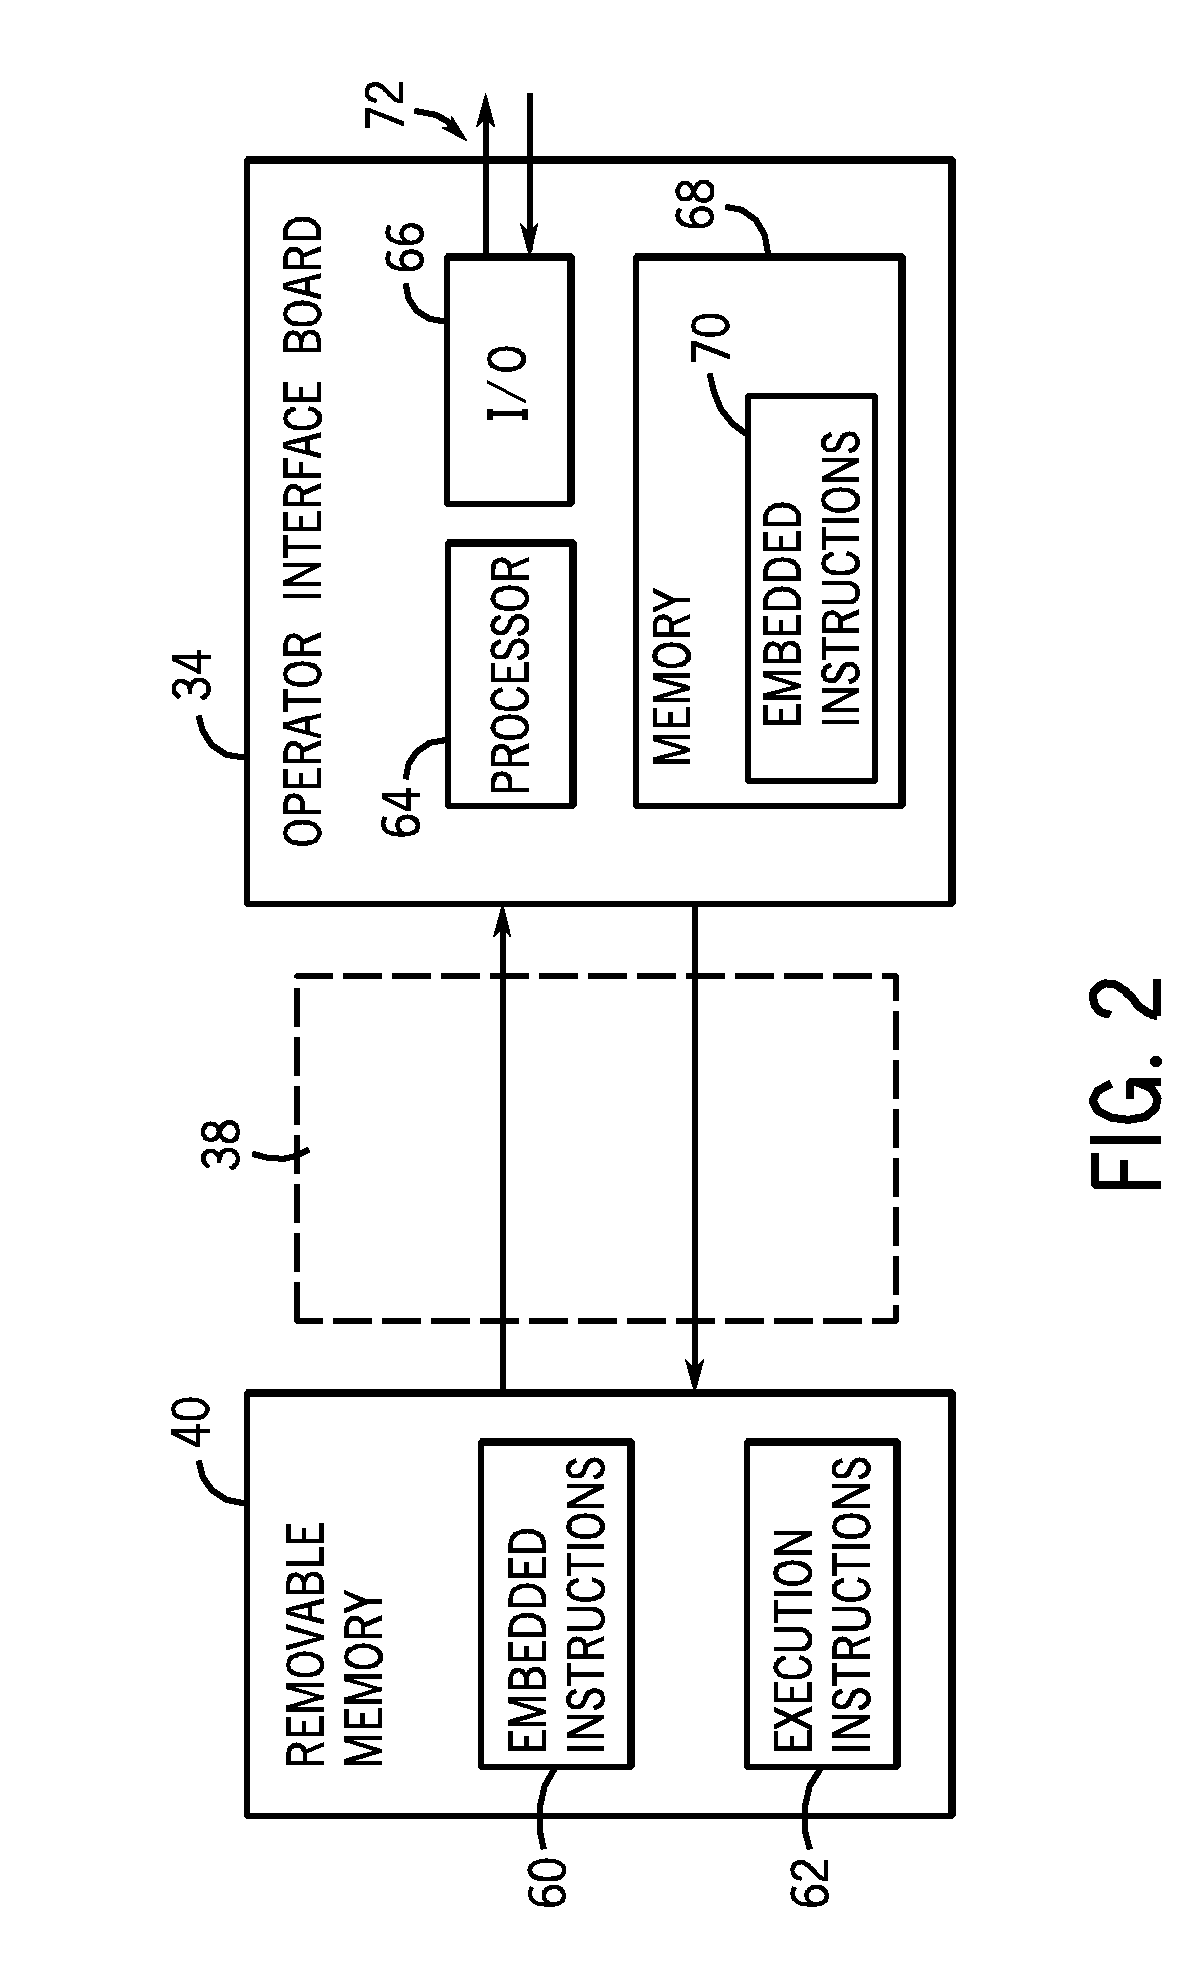 Embedded firmware updating system and method